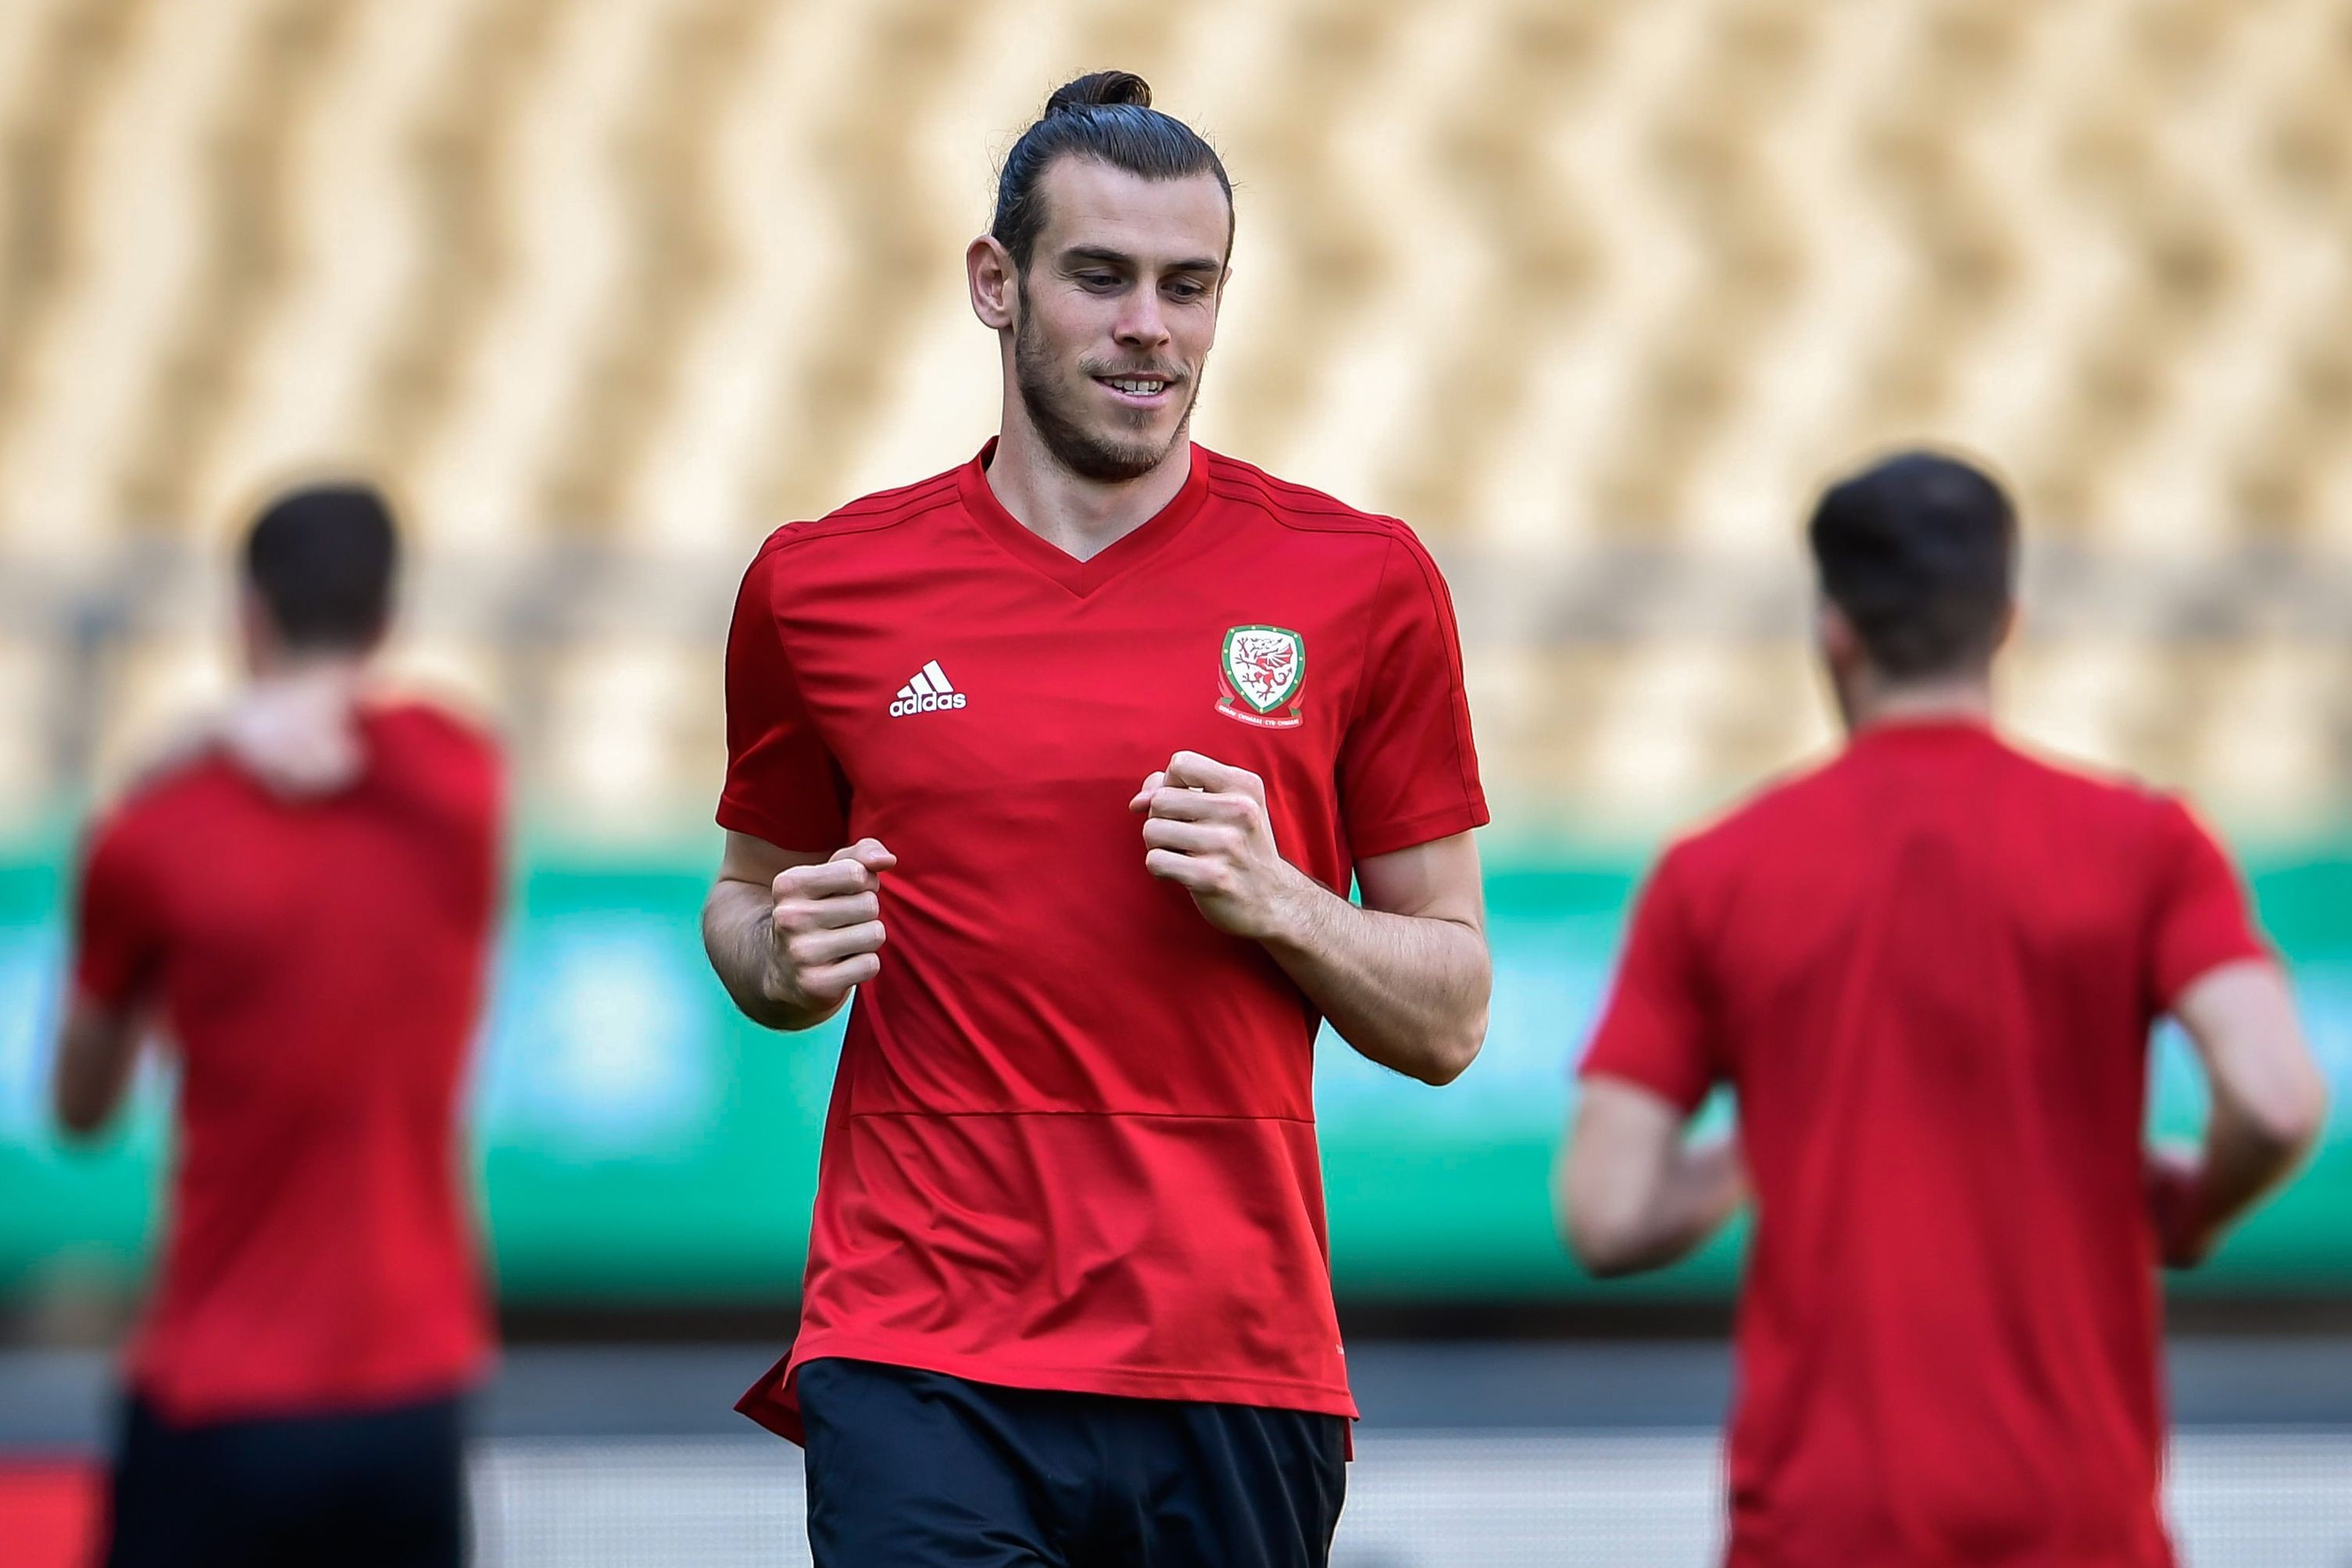 Wales’ Gareth Bale takes part in a training session before the China Cup in Nanning. Photo: APF